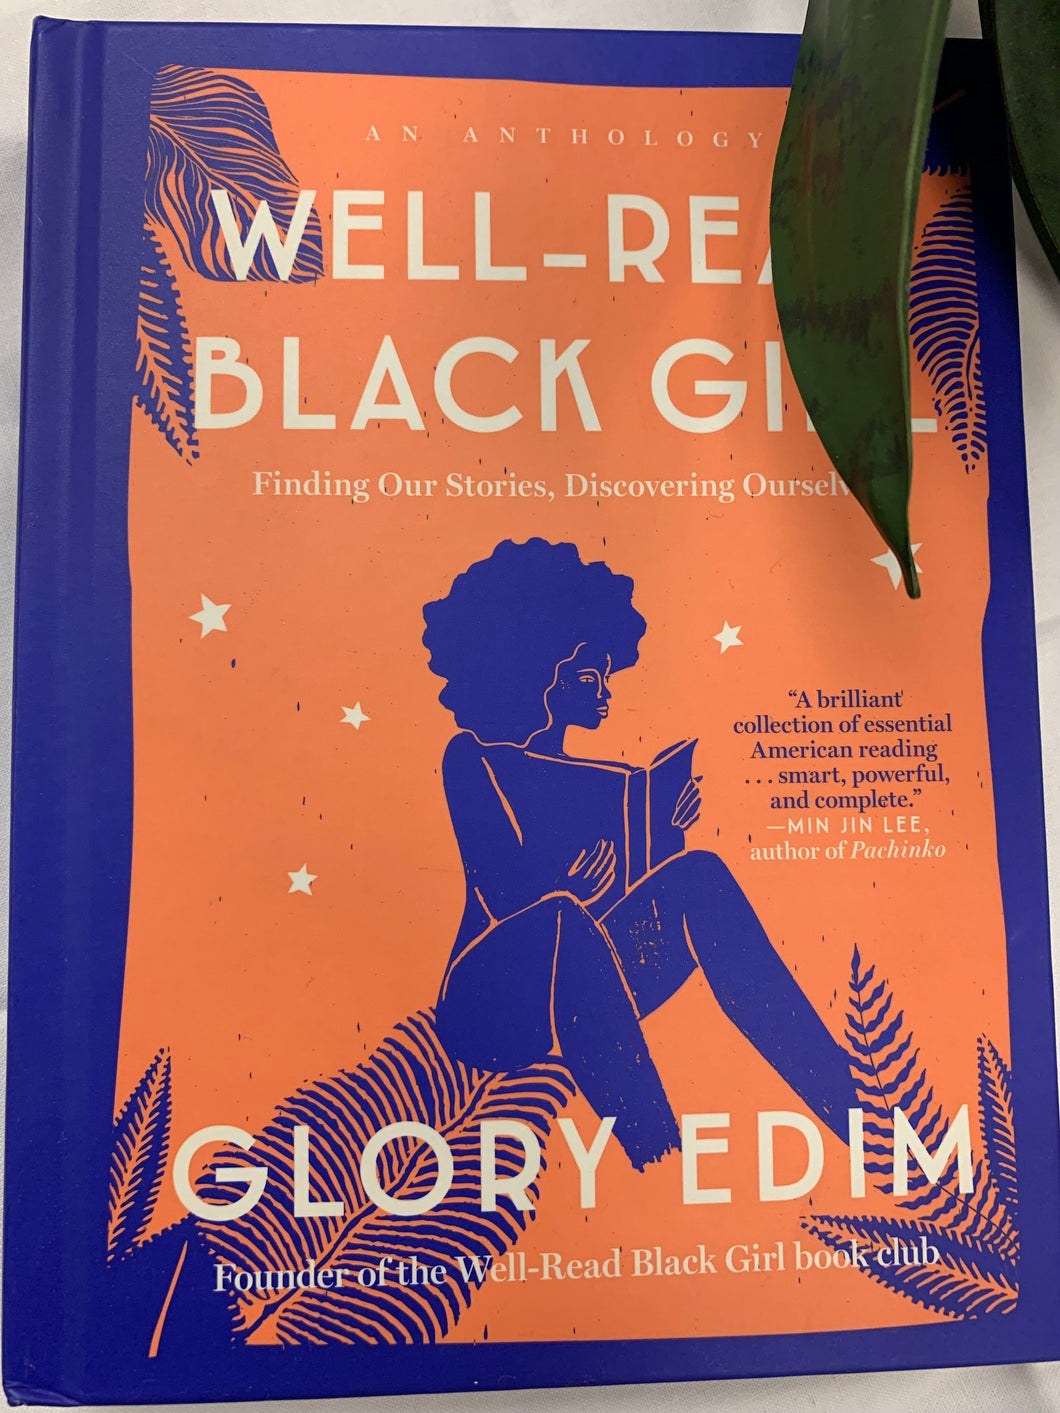 WELL-READ BLACK GIRL: FINDING OUR STORIES, DISCOVERING OURSELVES. By: Edim, Glory